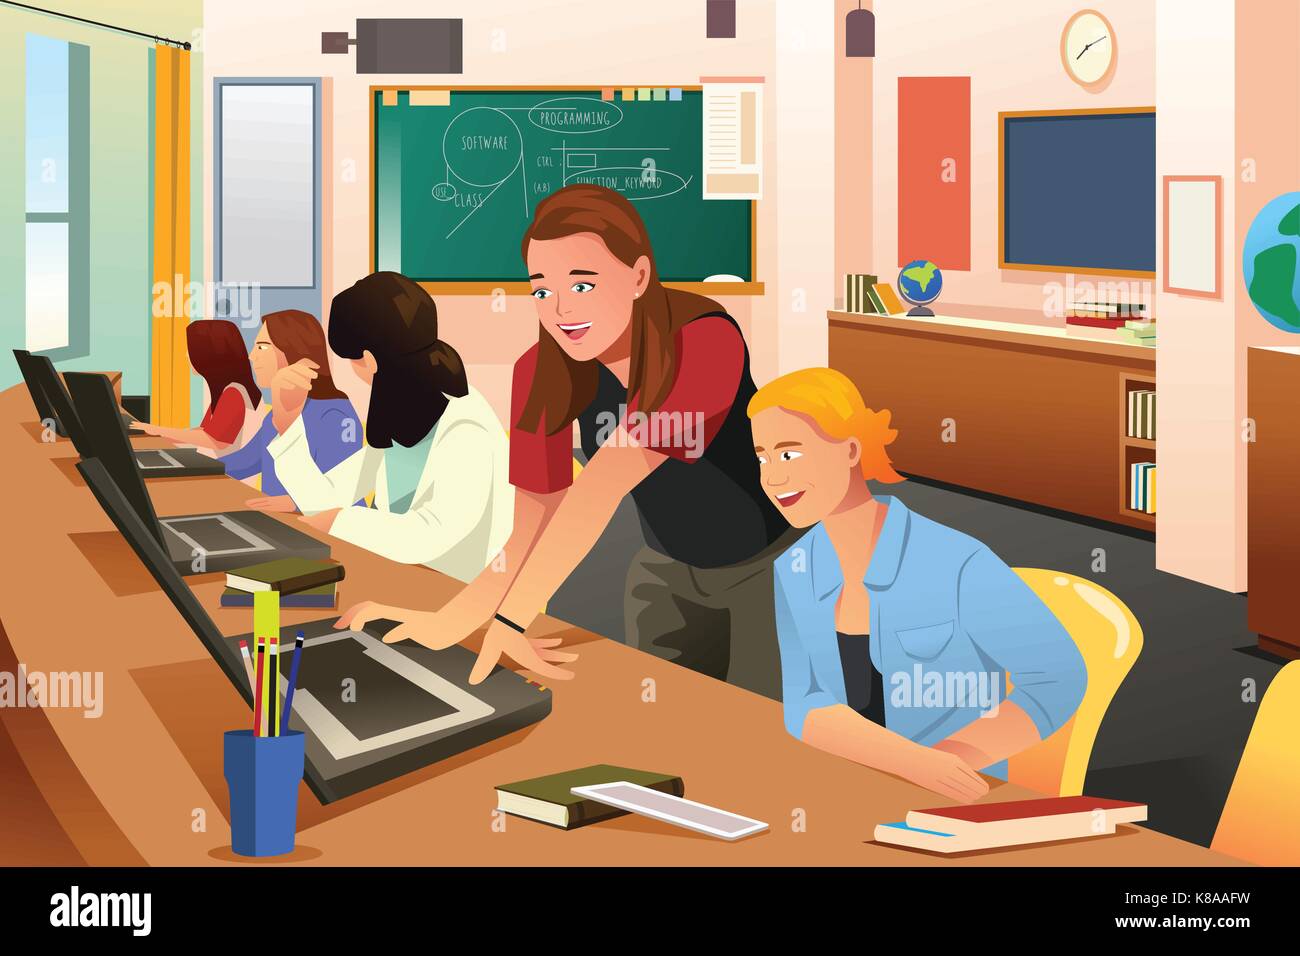 A vector illustration of Female Teacher in Computer Class with Students Stock Vector